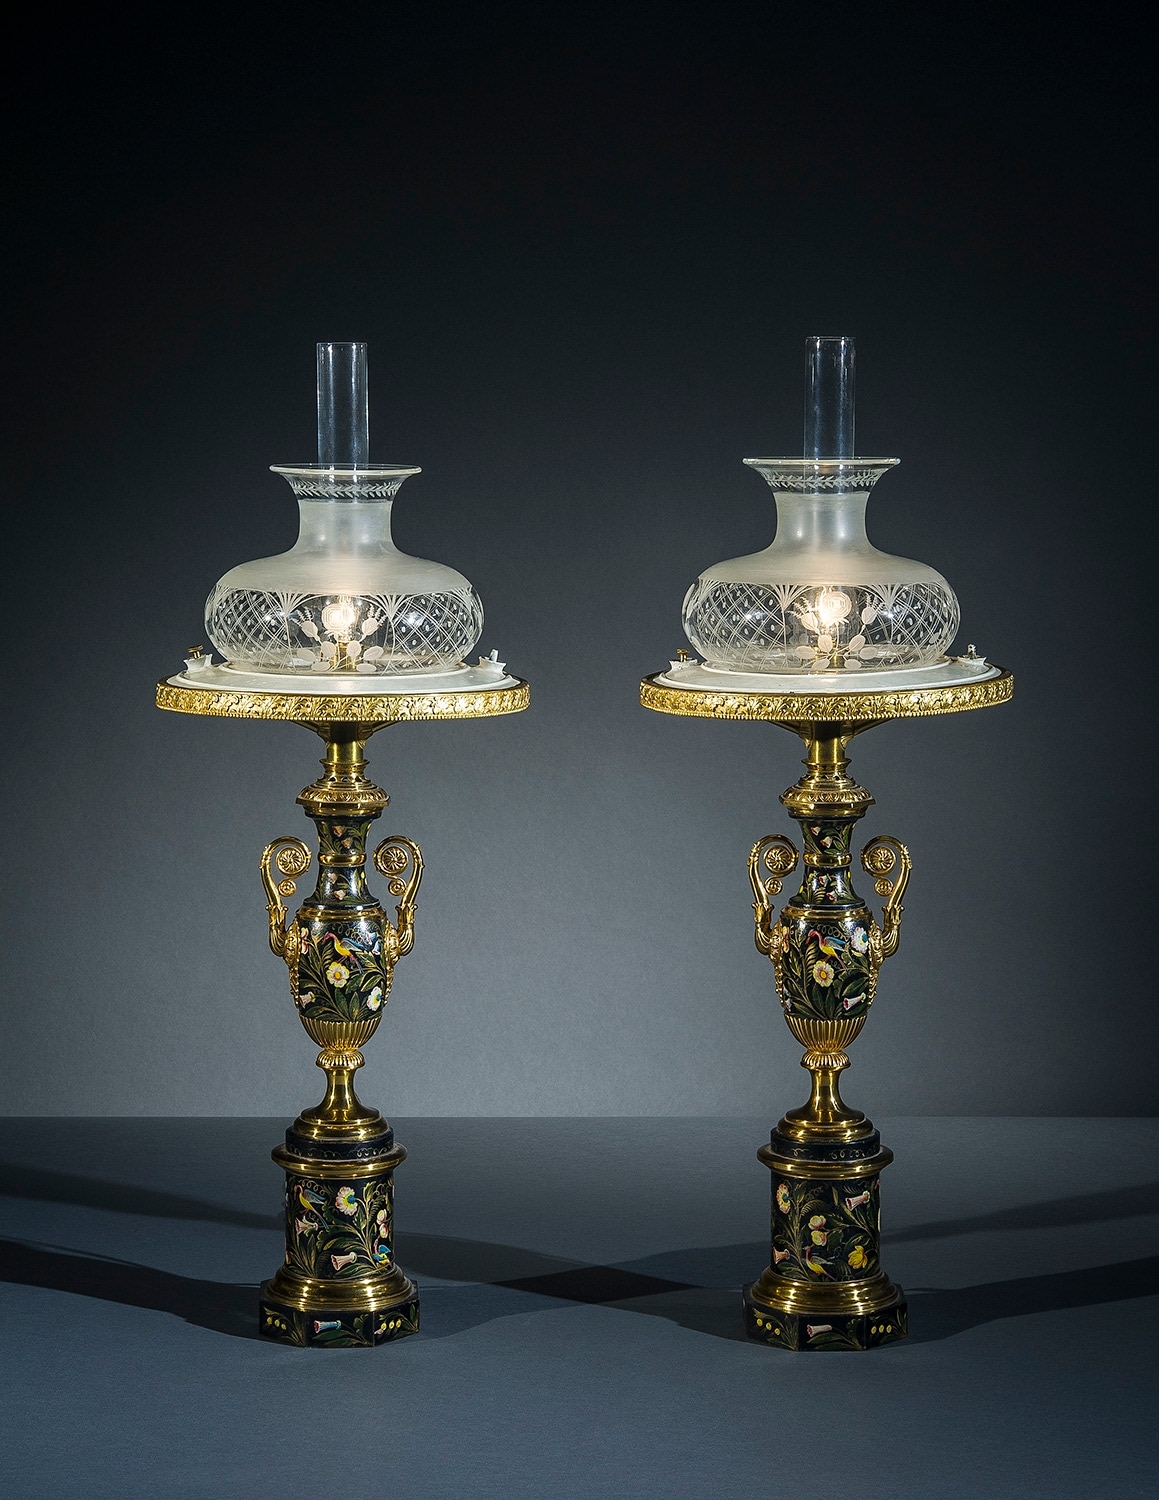 Pair Sinumbra Lamps in the Restauration Taste, about 1825